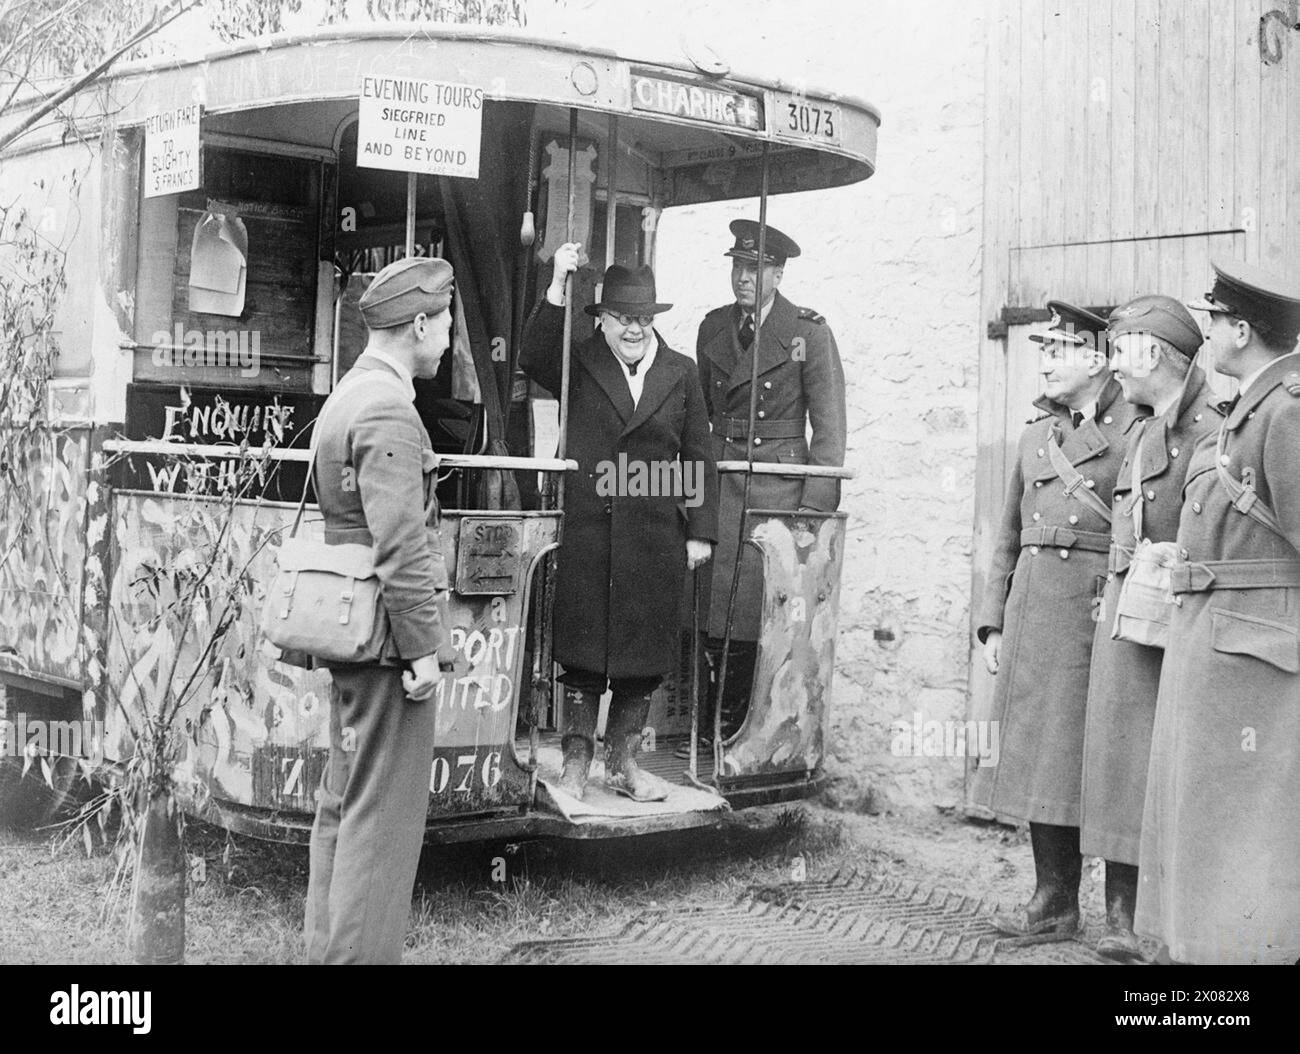 SIR KINGSLEY WOOD, SECRECTARY OF STATE FOR AIR, ON A TOUR OF THE RAF IN FRANCE 1939 - Sir Kingsley Wood, Secretary of State for Air, has completed a tour of the R.A.F. in France. Sir Kingsley Wood on a bus converted to office use clearly enjoys the slogans. Behind him is the Deputy Chief of the Air Staff. Officers on right -left to right -Air Vice Marshal P..H.L. Playfair, Officer Commanding R.A.F. in France, and two of his staff -Group Captain A.H. Wann and Air Commodore J.C. Quinnell Stock Photo